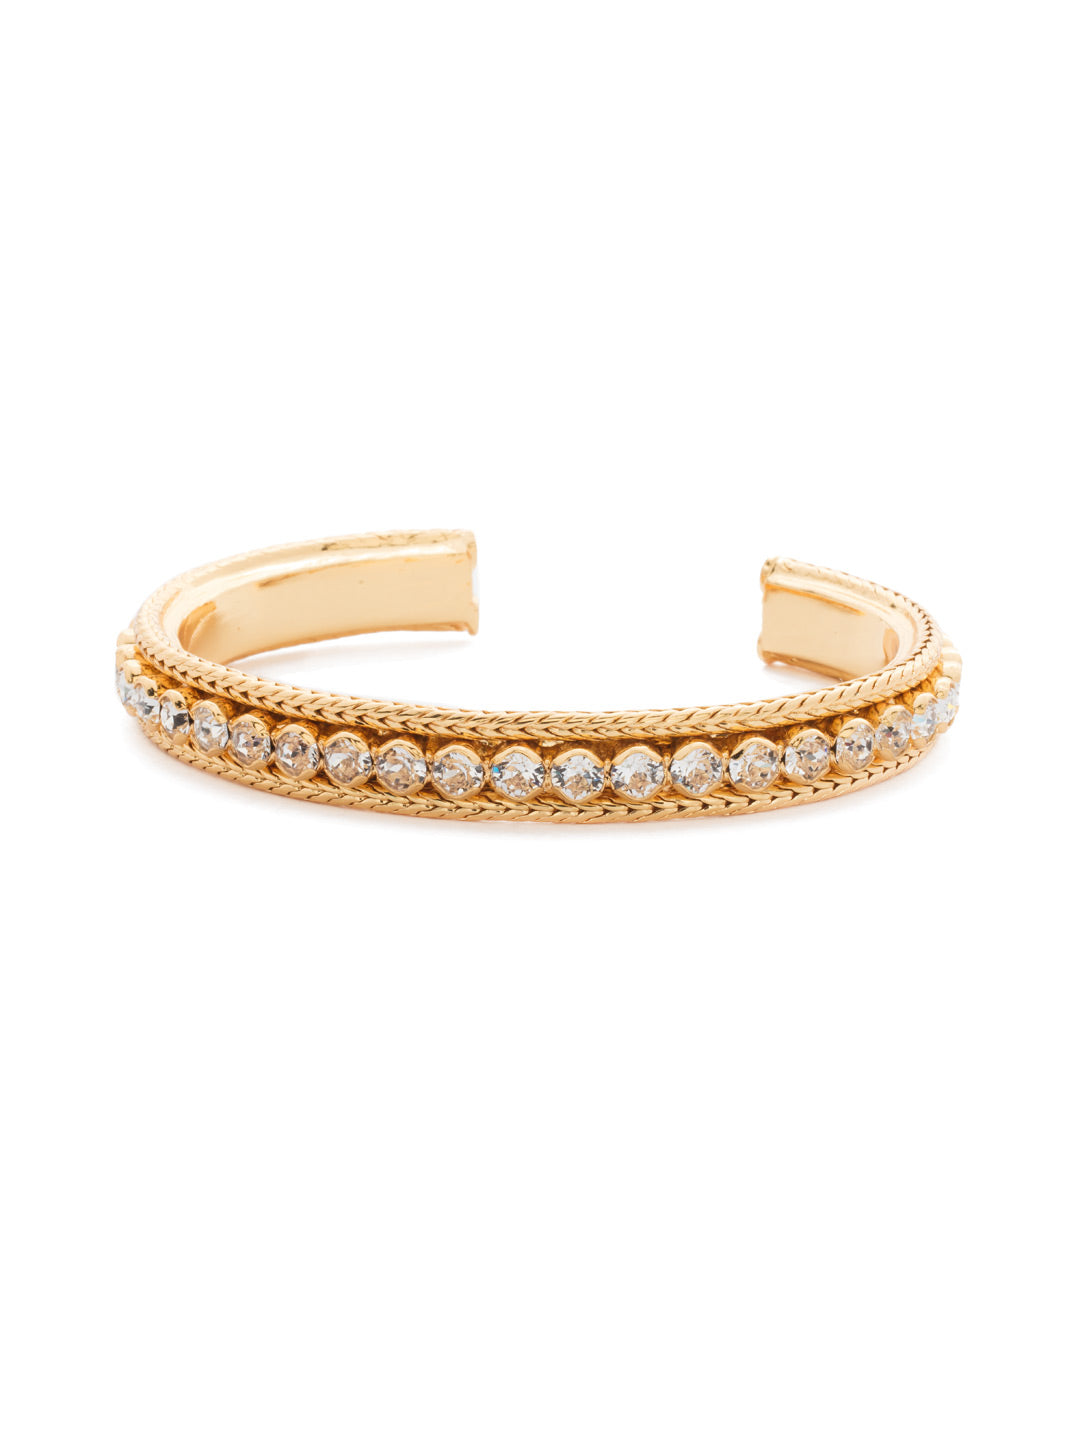 Product Image: Channeling Chic Cuff Bracelet